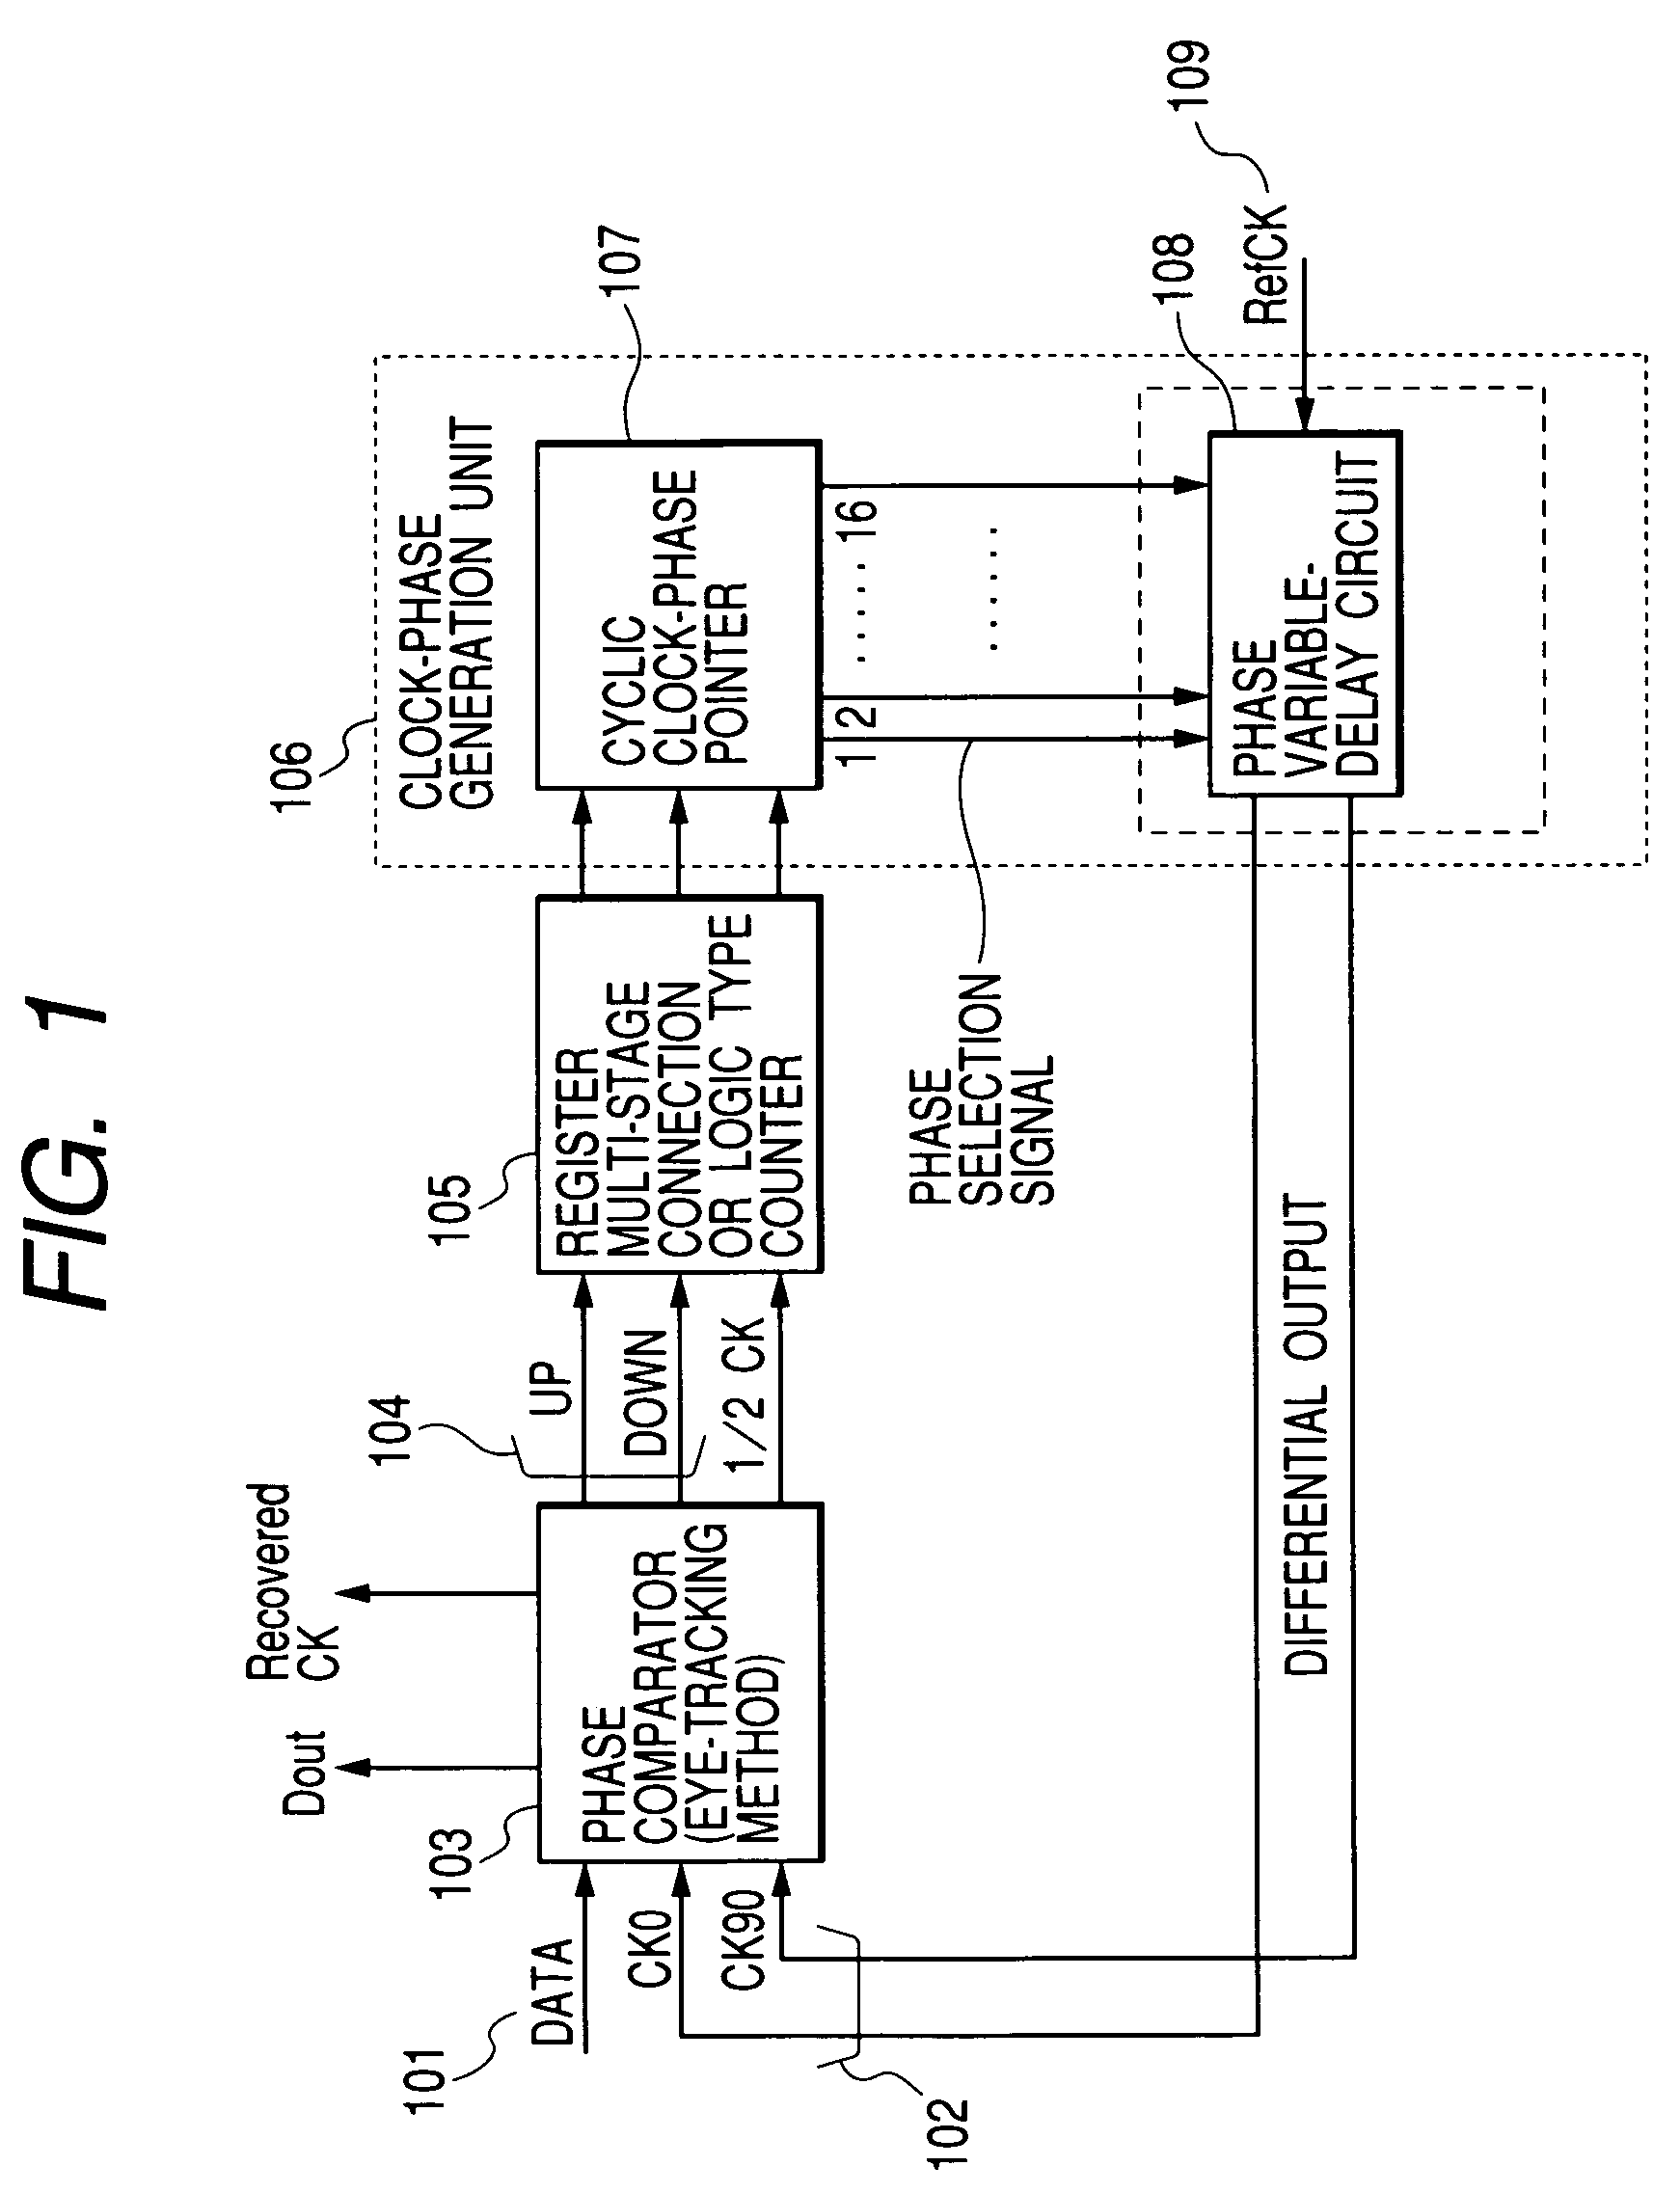 Clock and data recovery method and digital circuit for the same